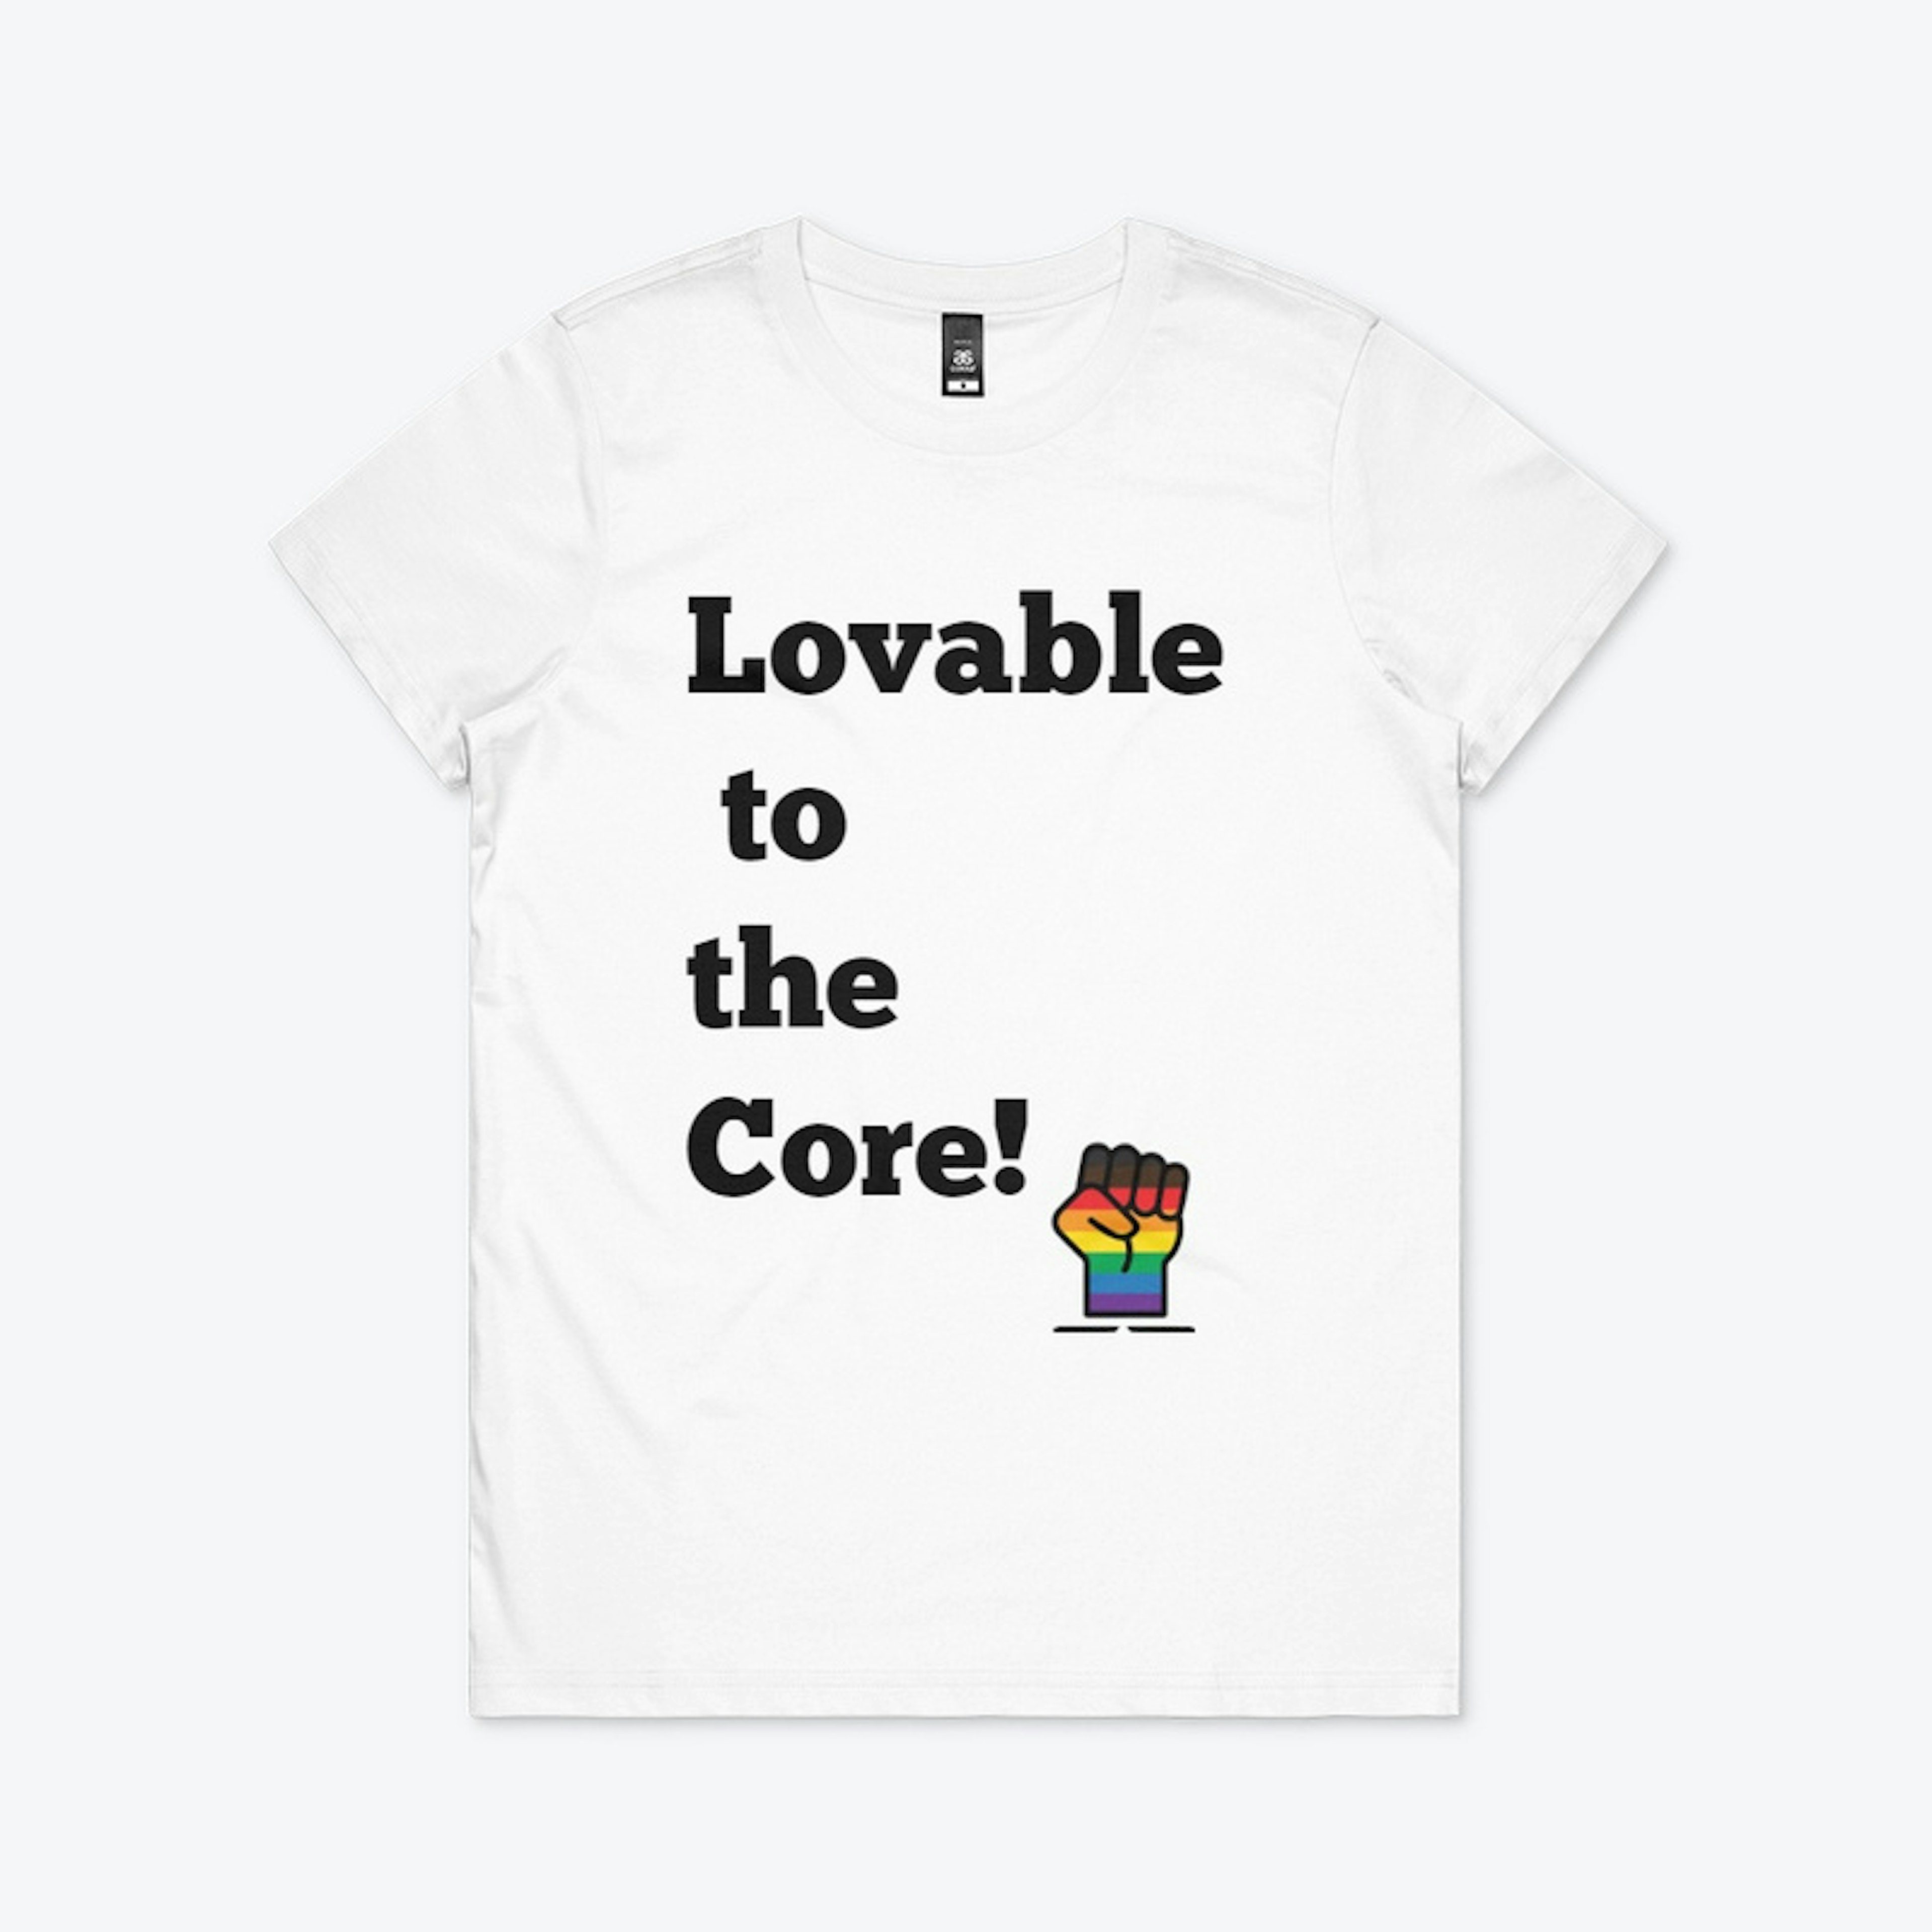 Lovable to the Core!